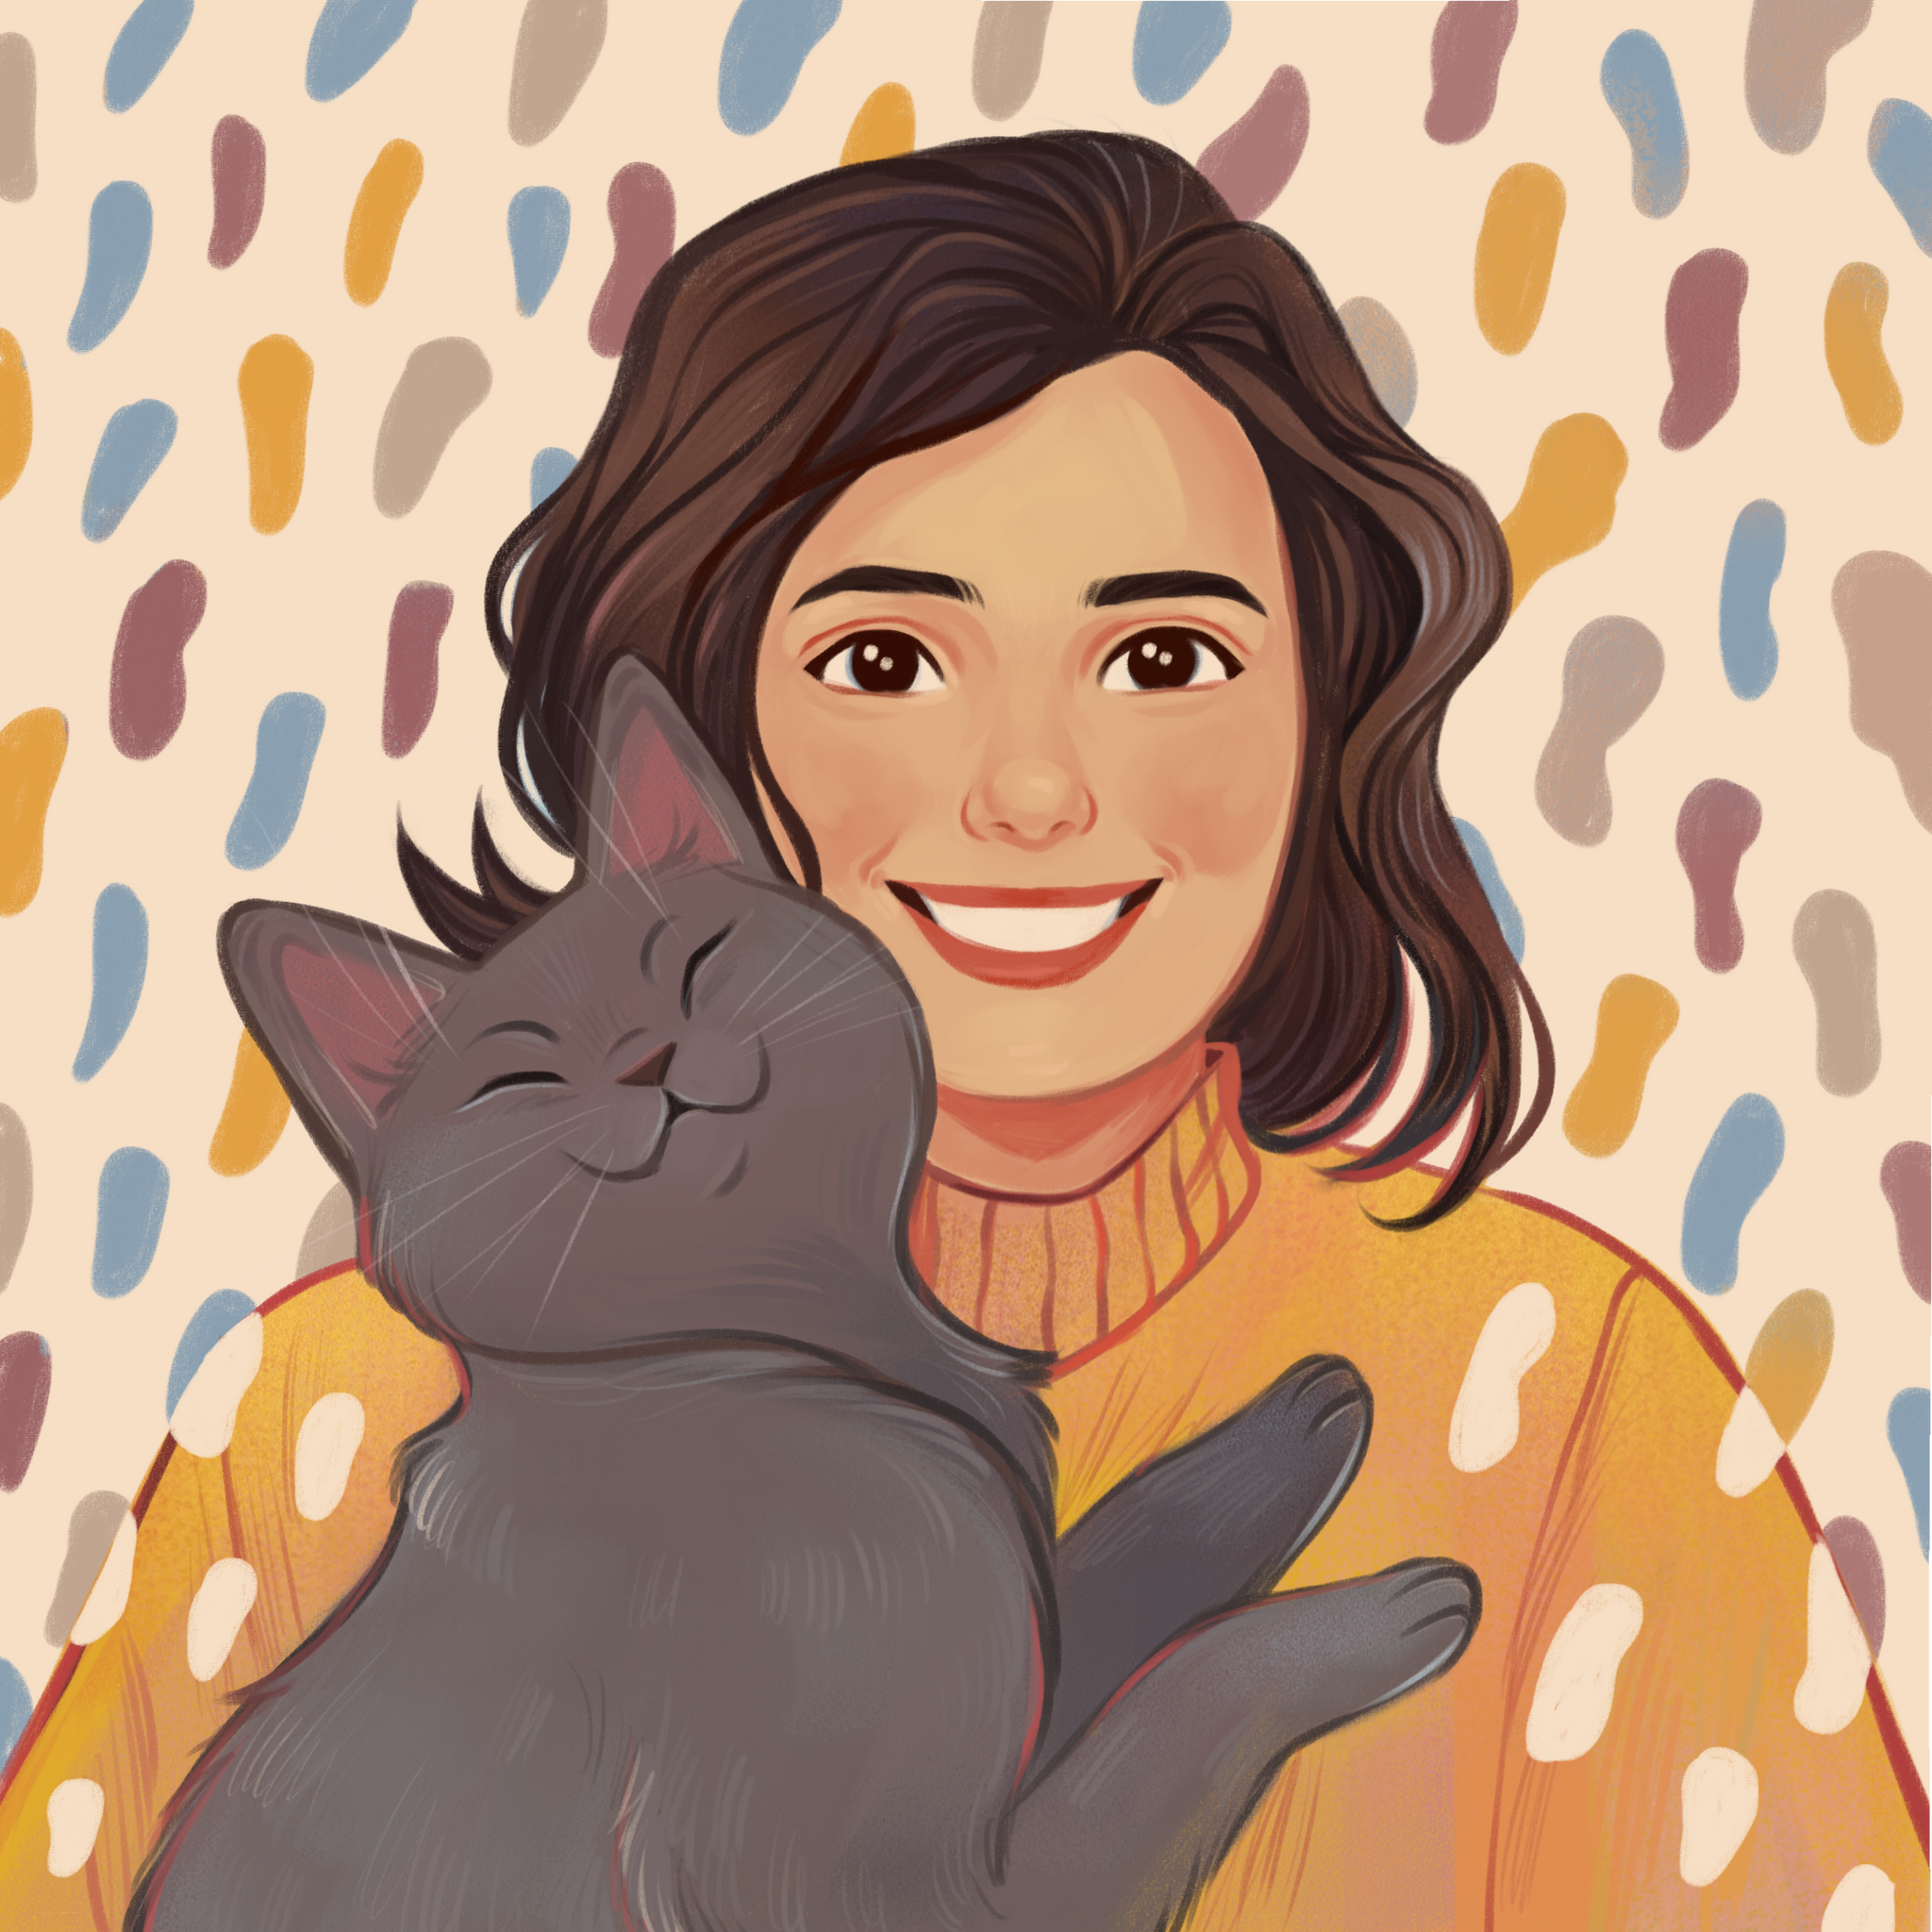 Digital portrait of people with pets